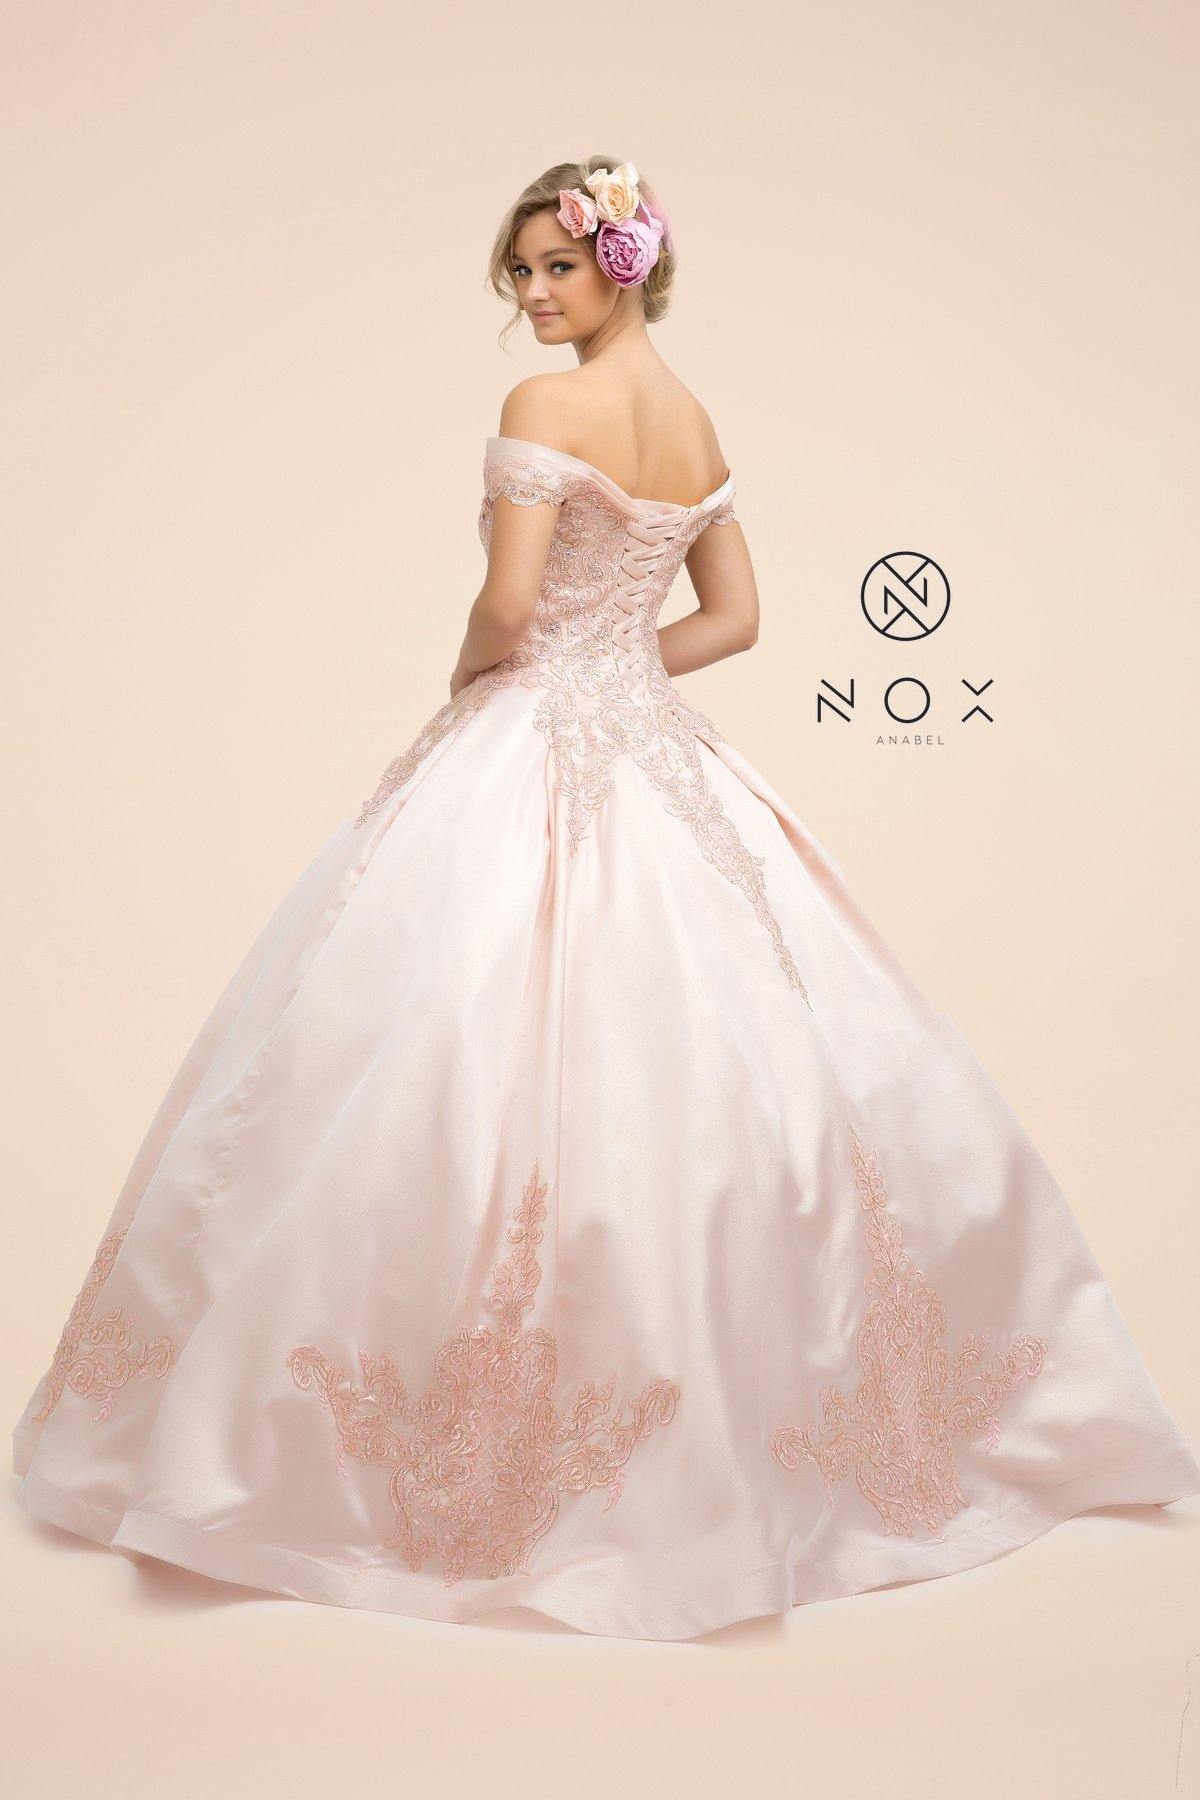 Lace Applique Ball Gown Long Prom Dress - The Dress Outlet Nox Anabel